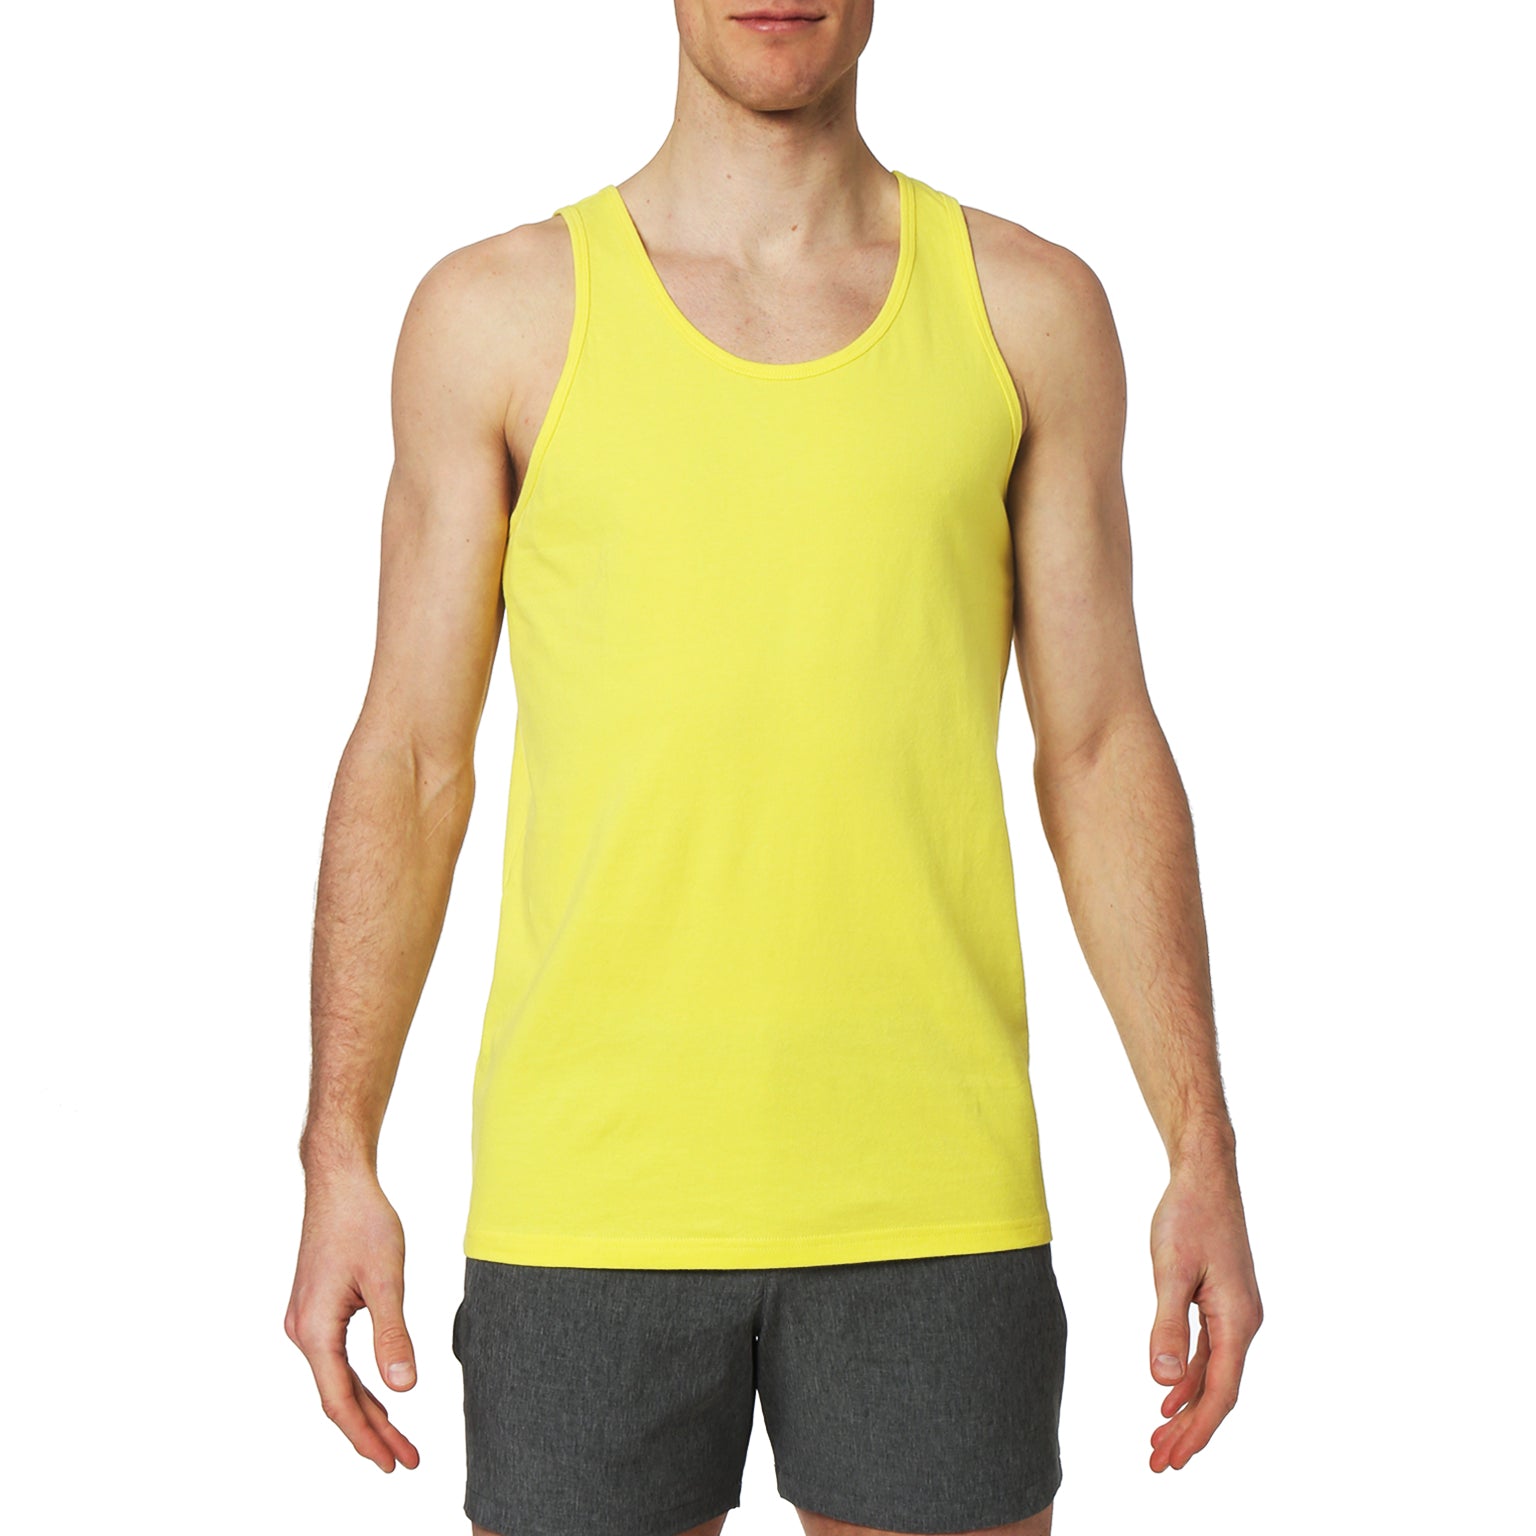 SAVE 70%- ACTIONWEAR- Canary Solid Essential Cotton Tank Top